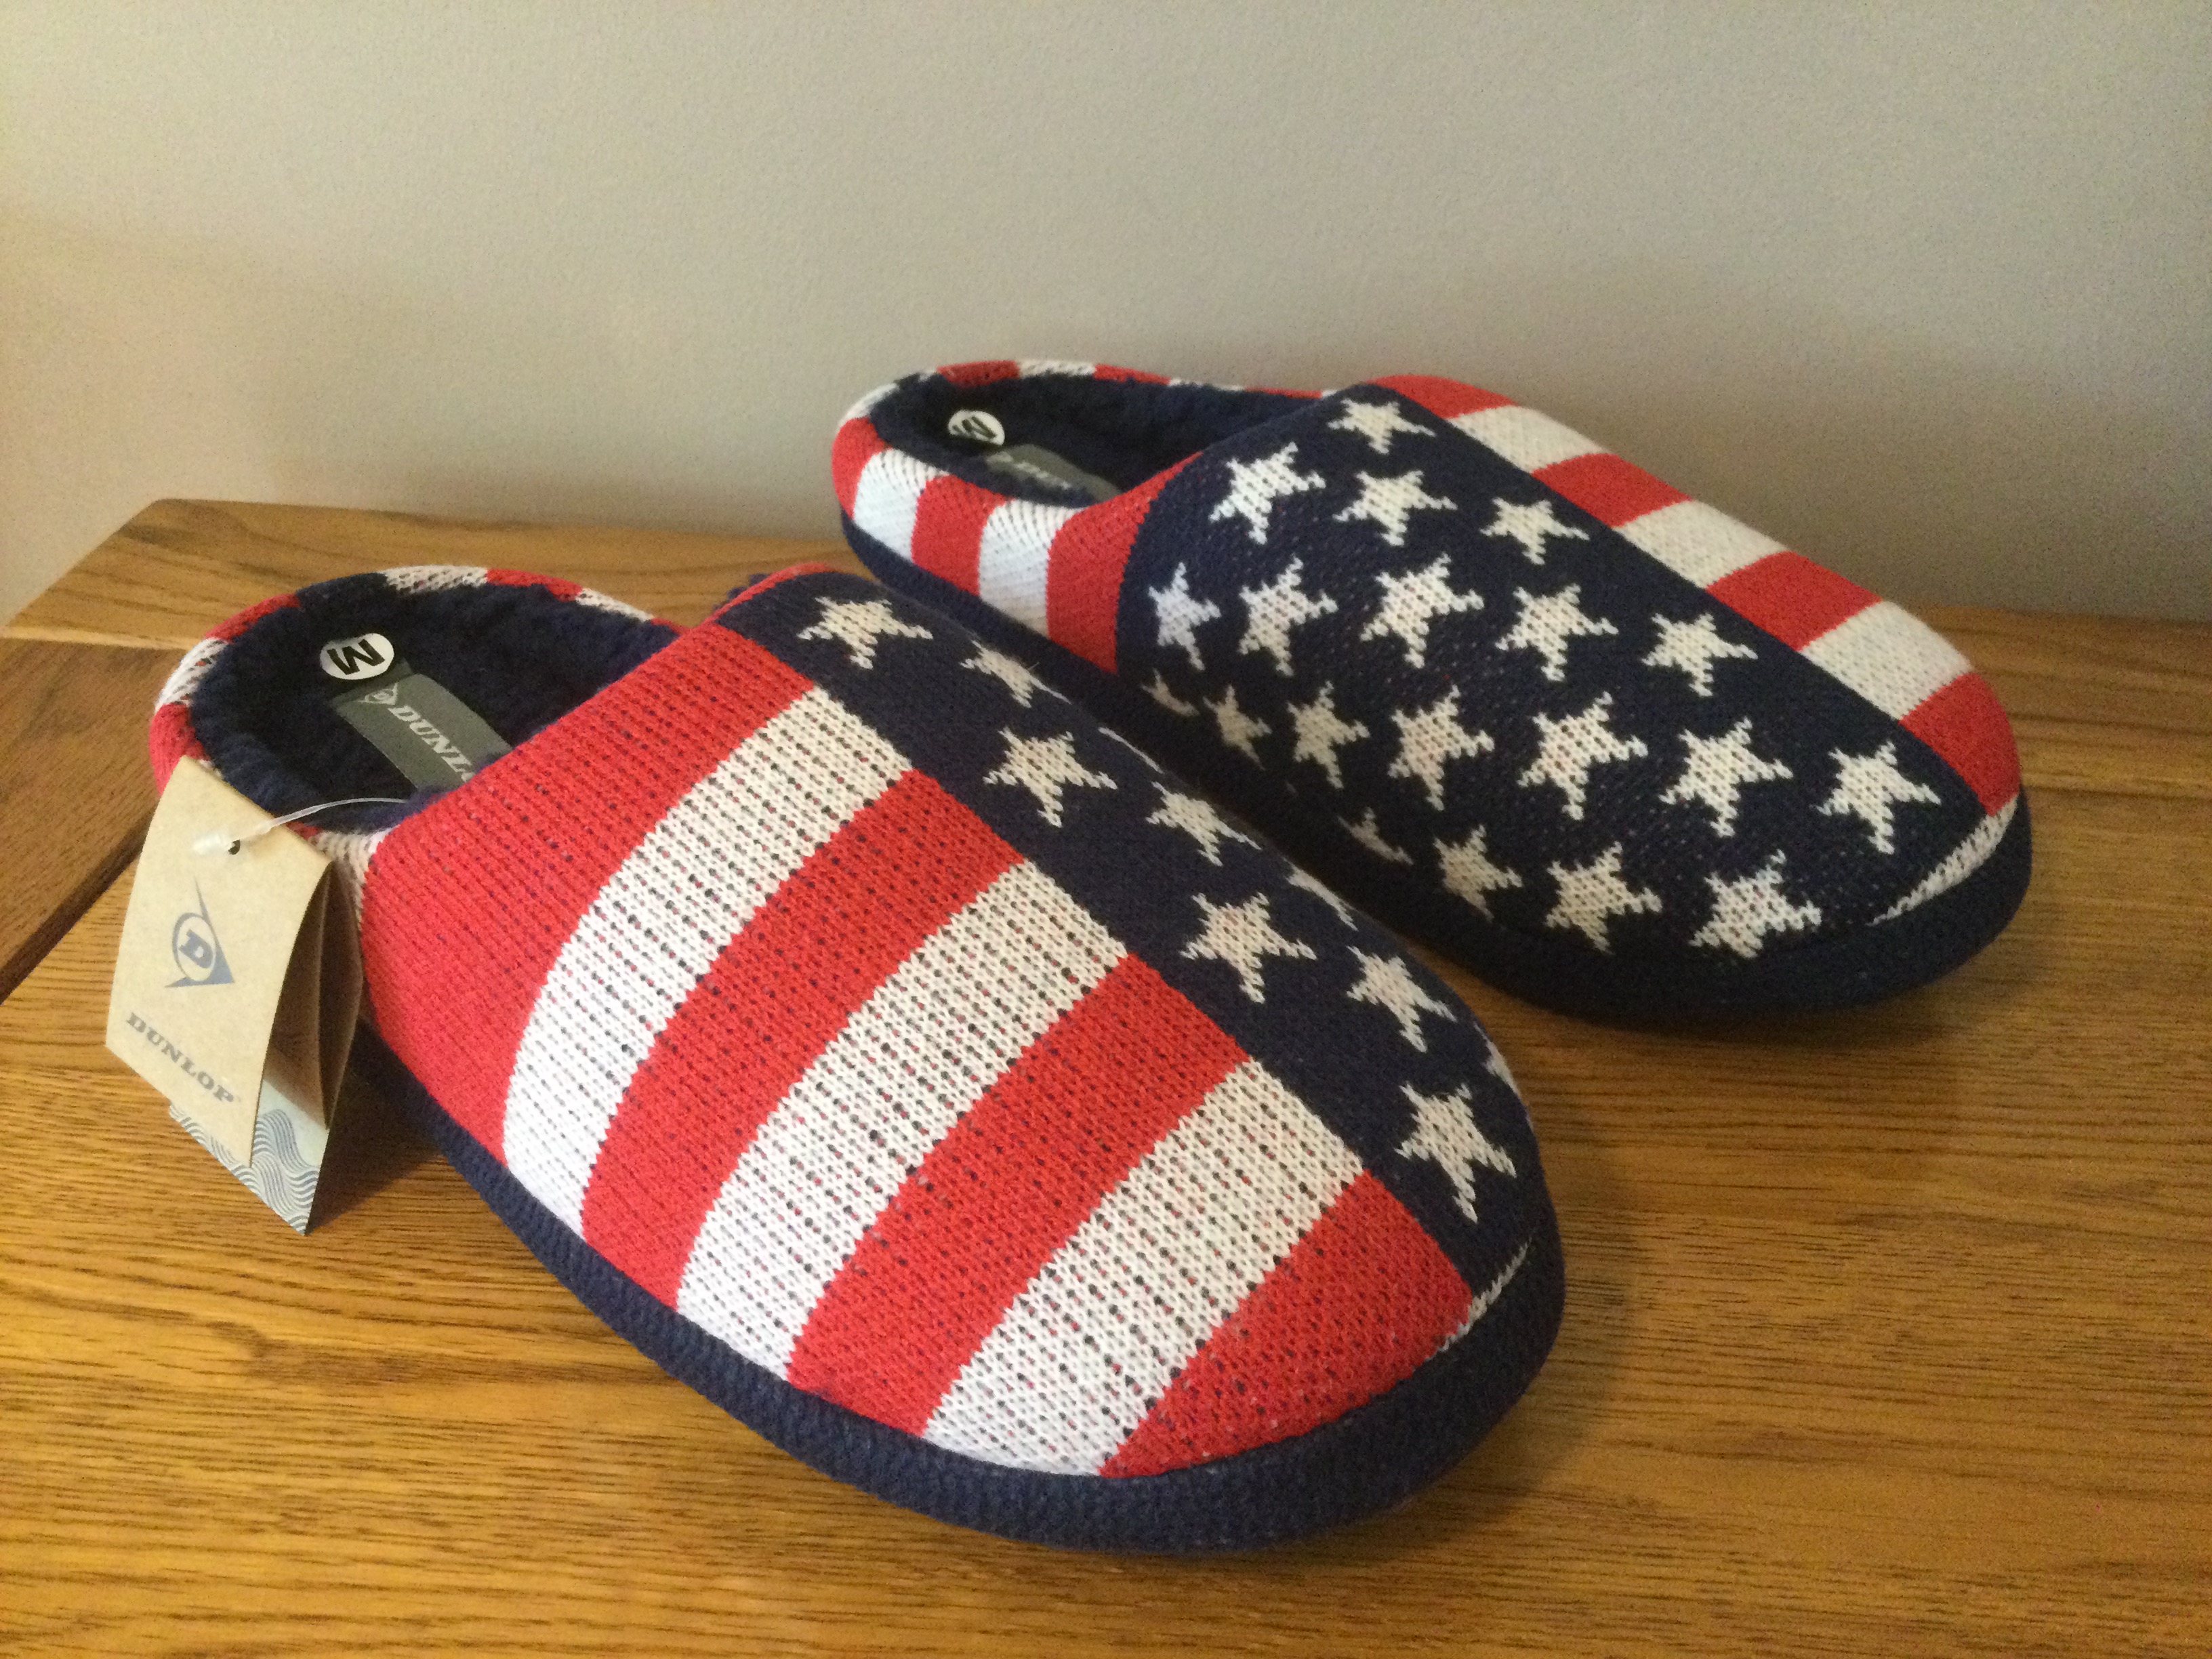 Men's Dunlop, “USA Stars and Stripes” Memory Foam, Mule Slippers, Size M (8/9) - New - Image 3 of 5